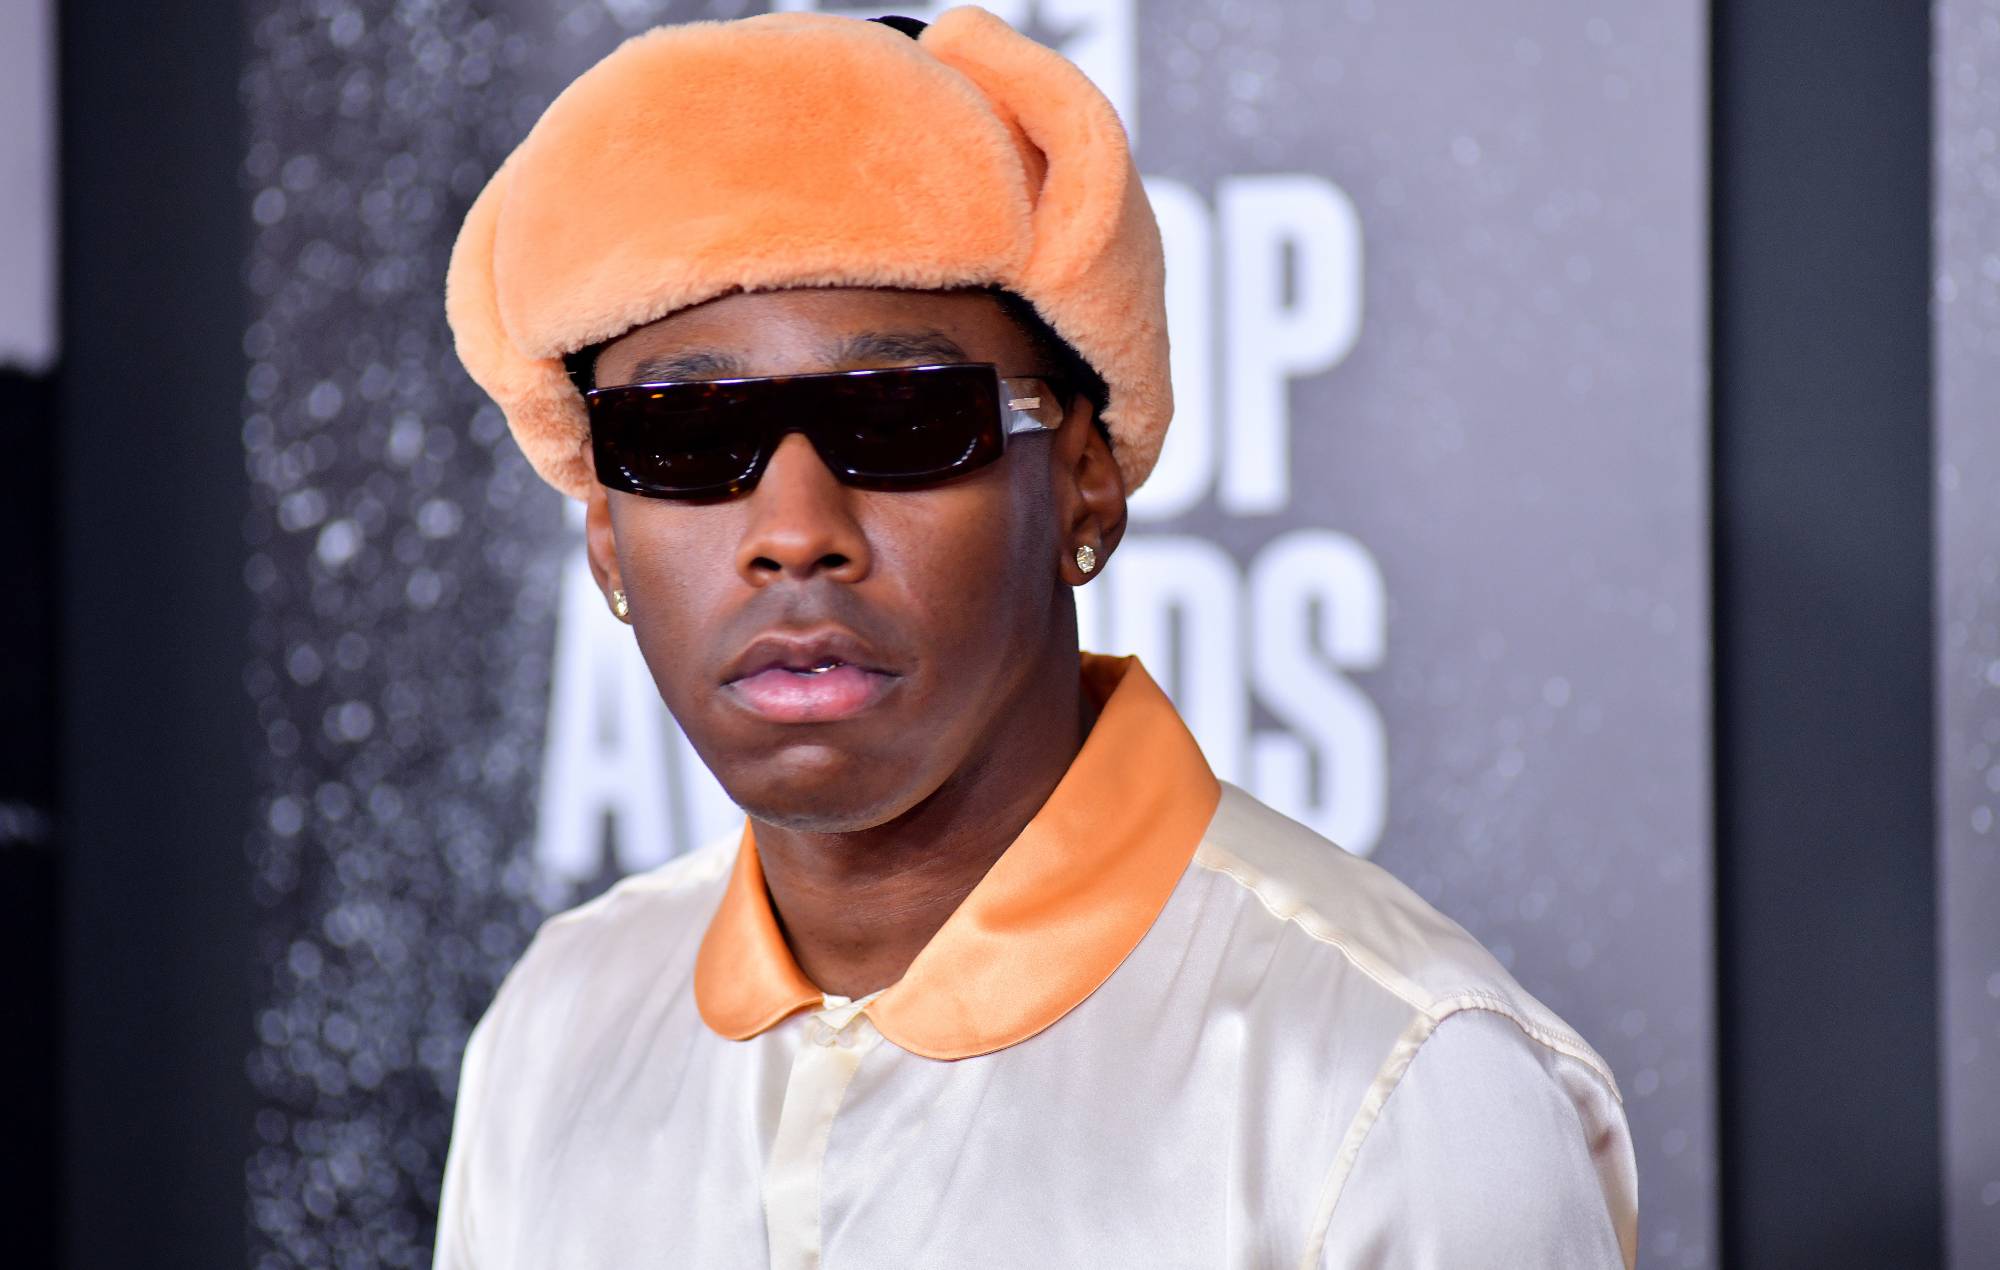 Tyler, The Creator tells fans heading to Coachella: “I would love to see y’all faces and not your phone lights”